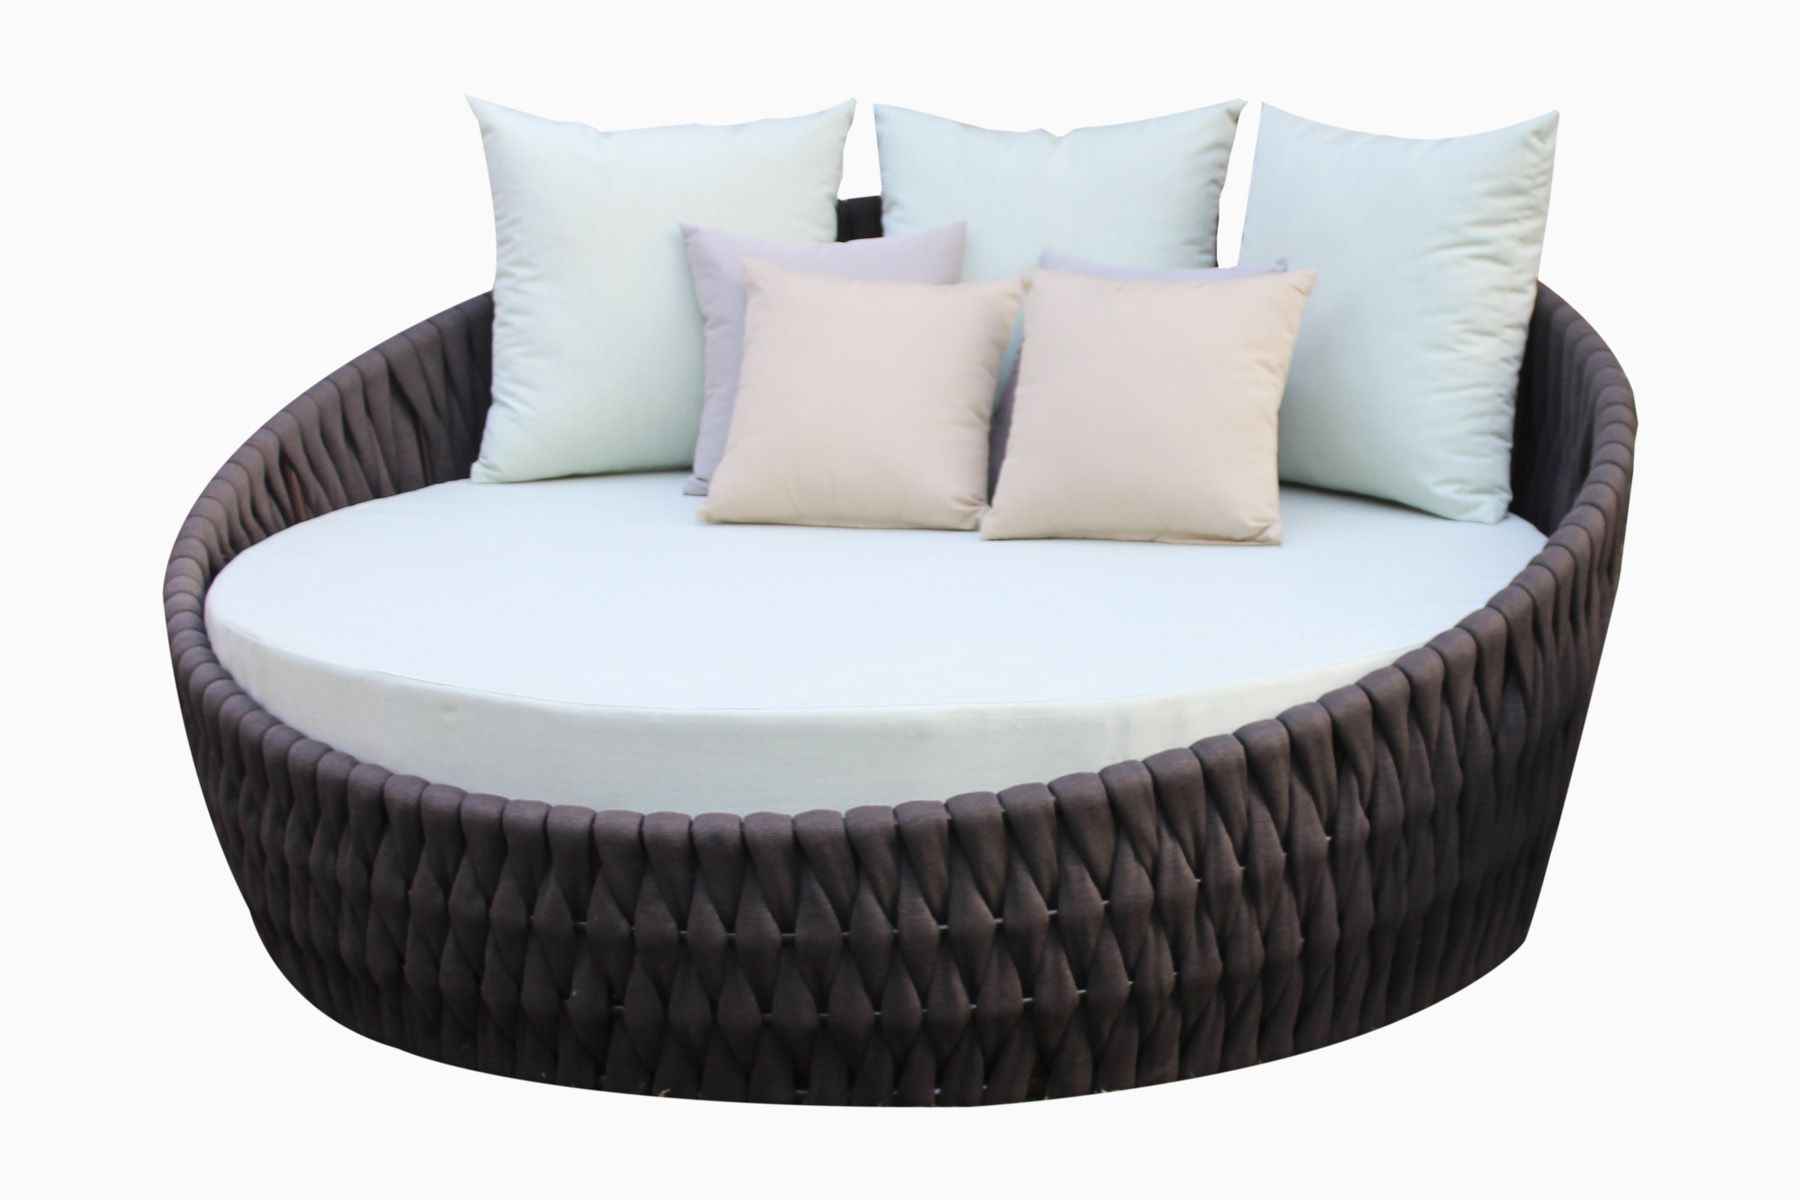 Ordoba Patio Daybed